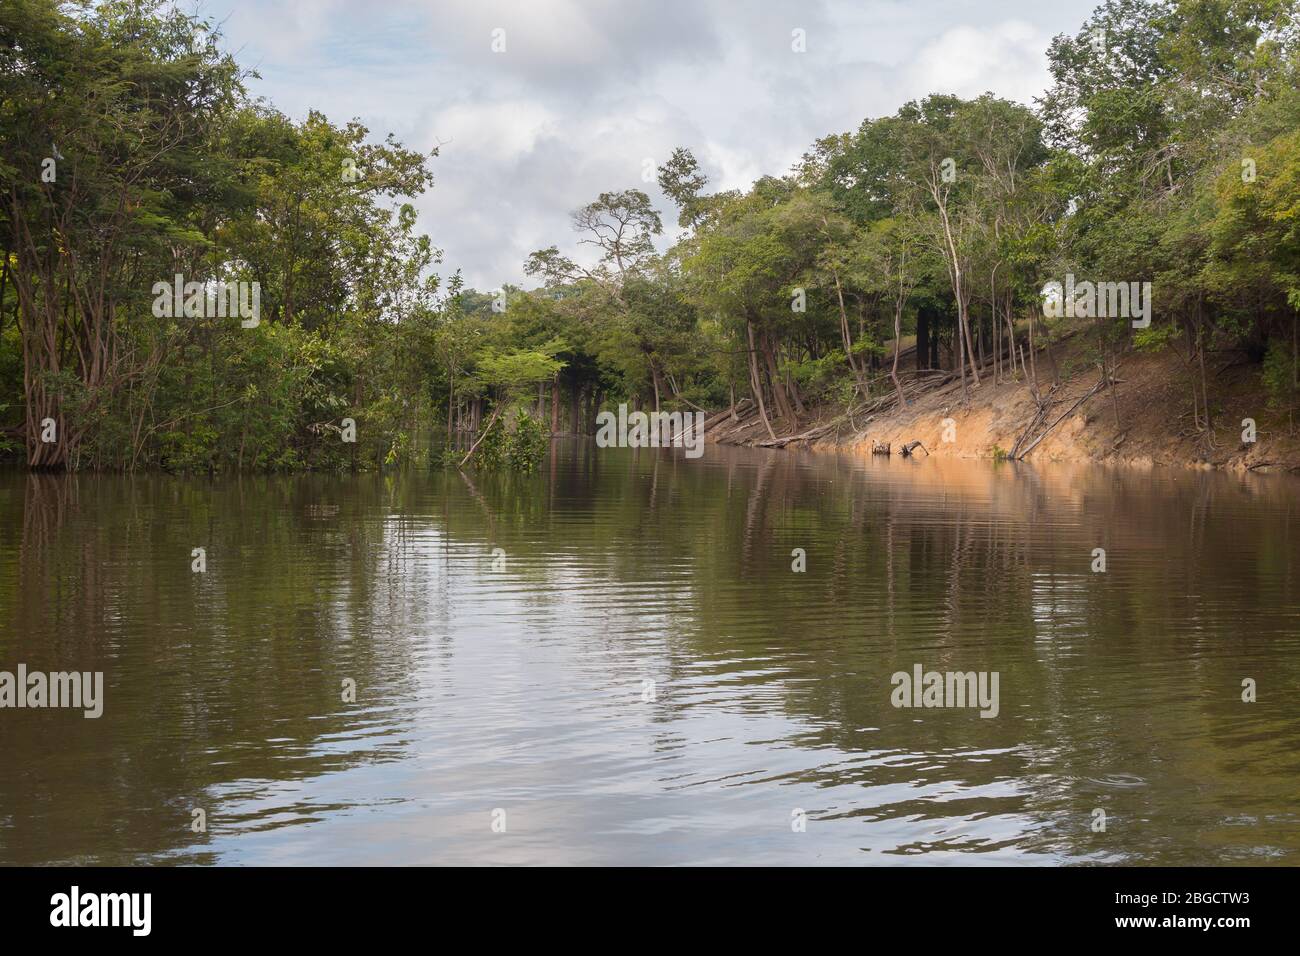 Calm waters of the Solimoes River, part of the Amazon river system, in Brazil. Surrounded by ancient jungle. Stock Photo